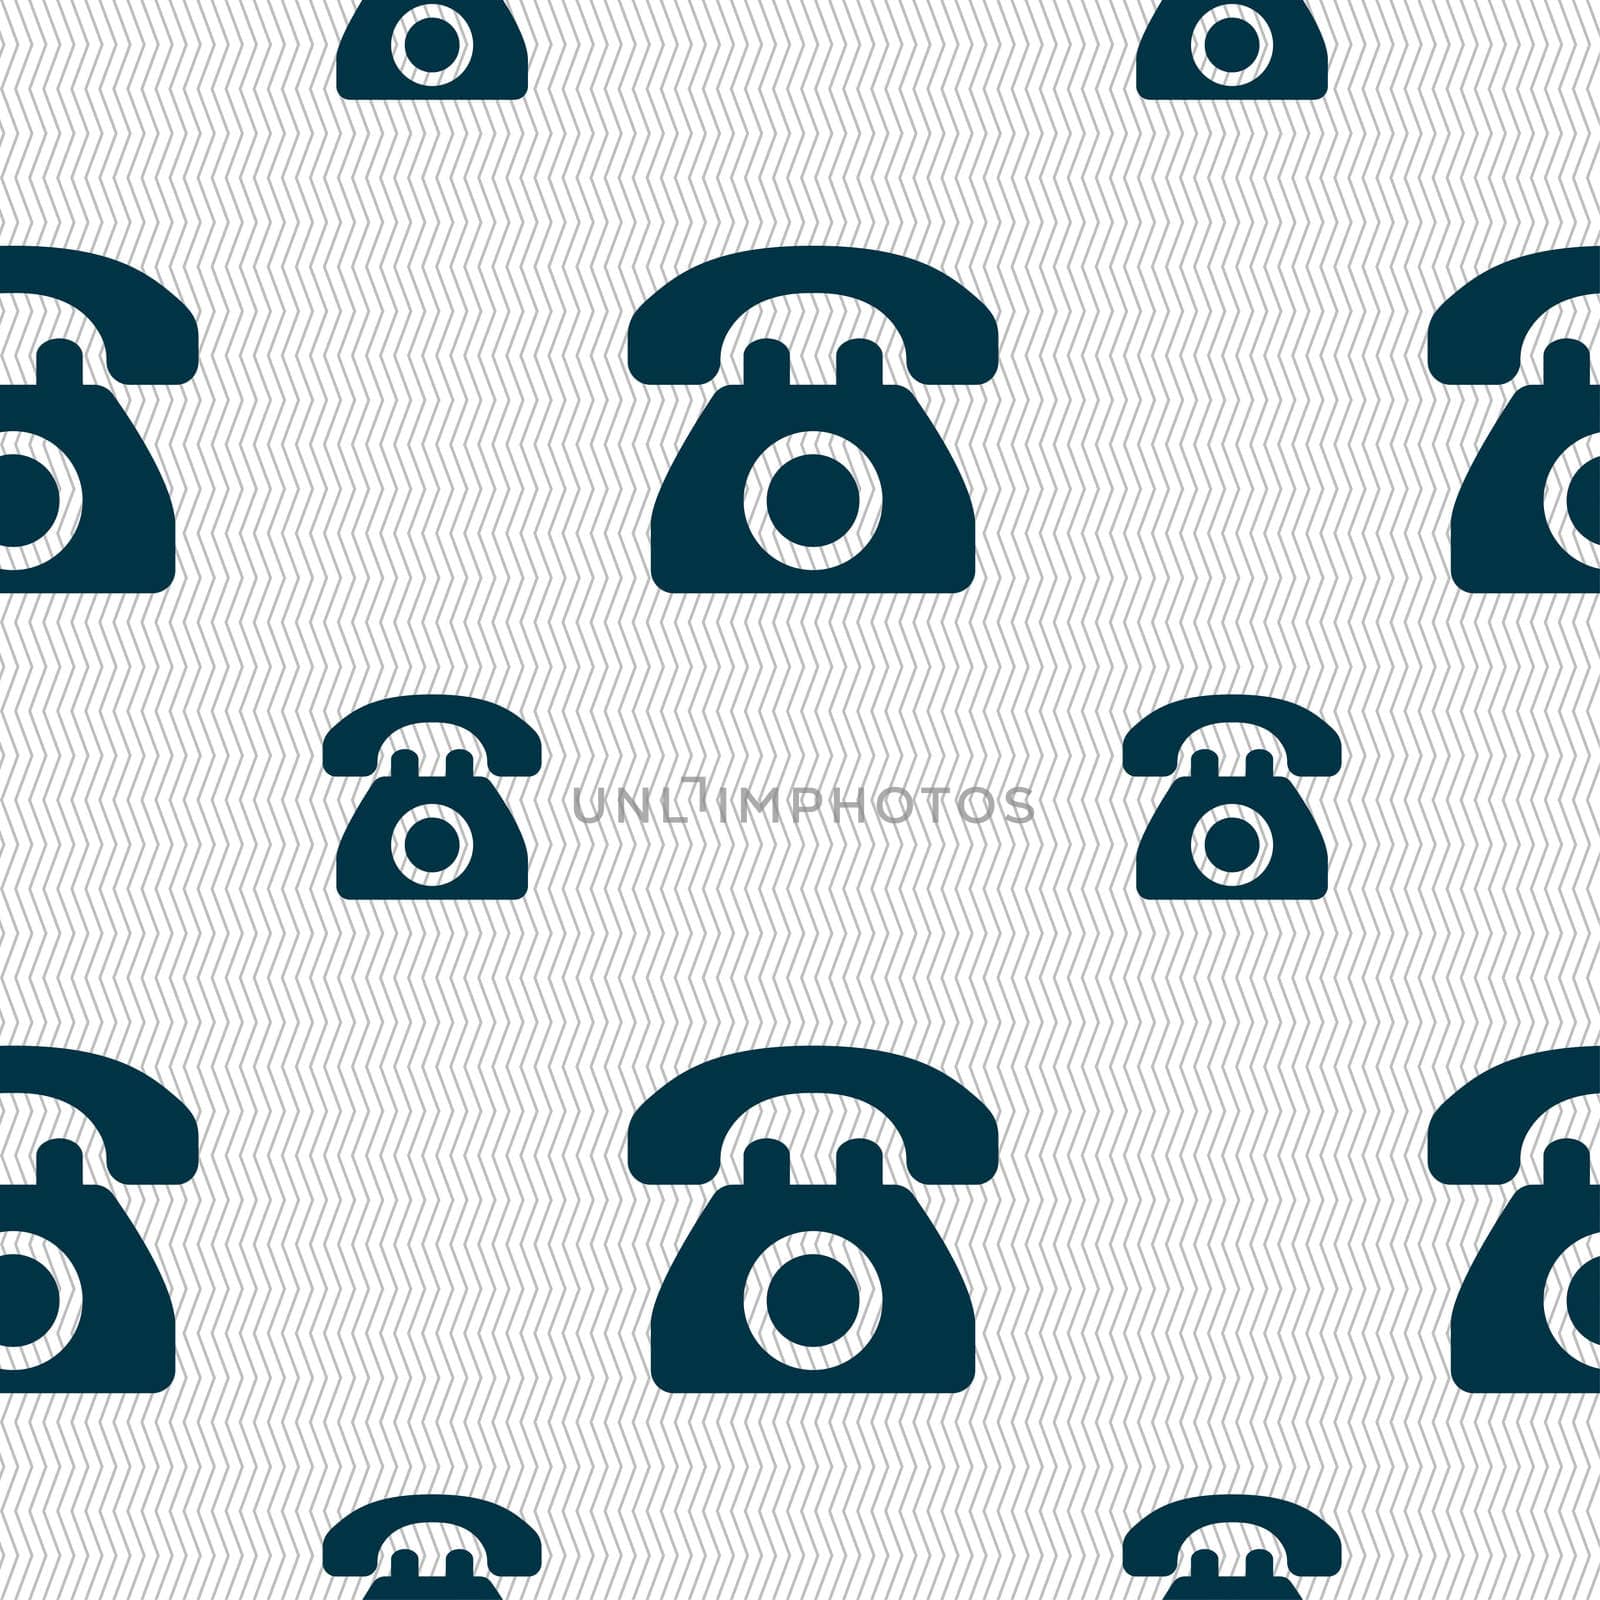 Retro telephone icon sign. Seamless pattern with geometric texture. illustration